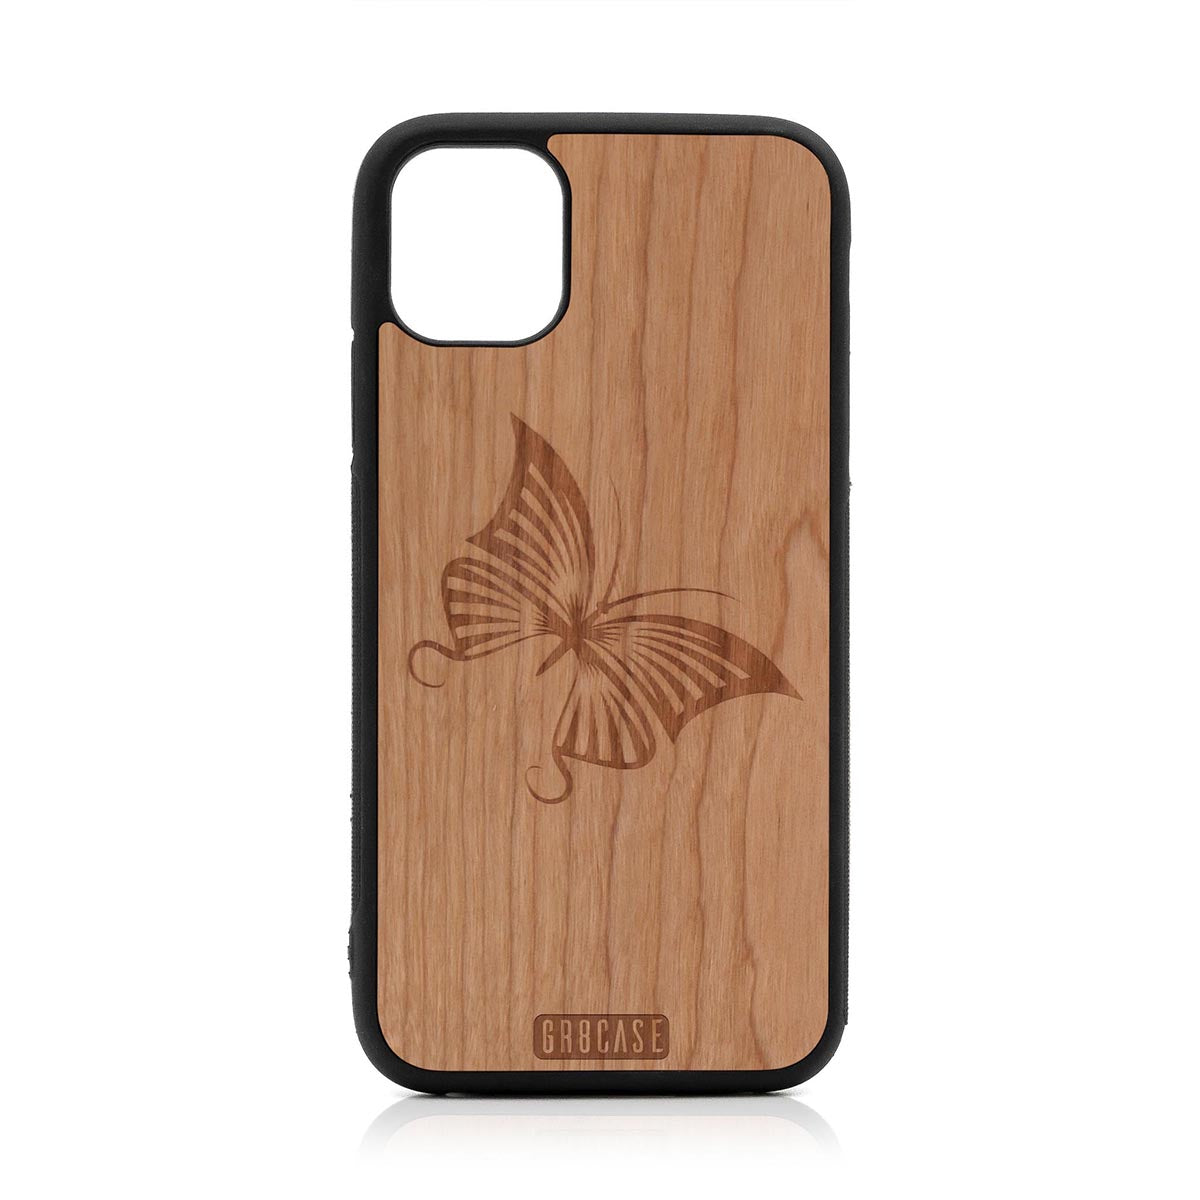 Butterfly Design Wood Case For iPhone 11 by GR8CASE